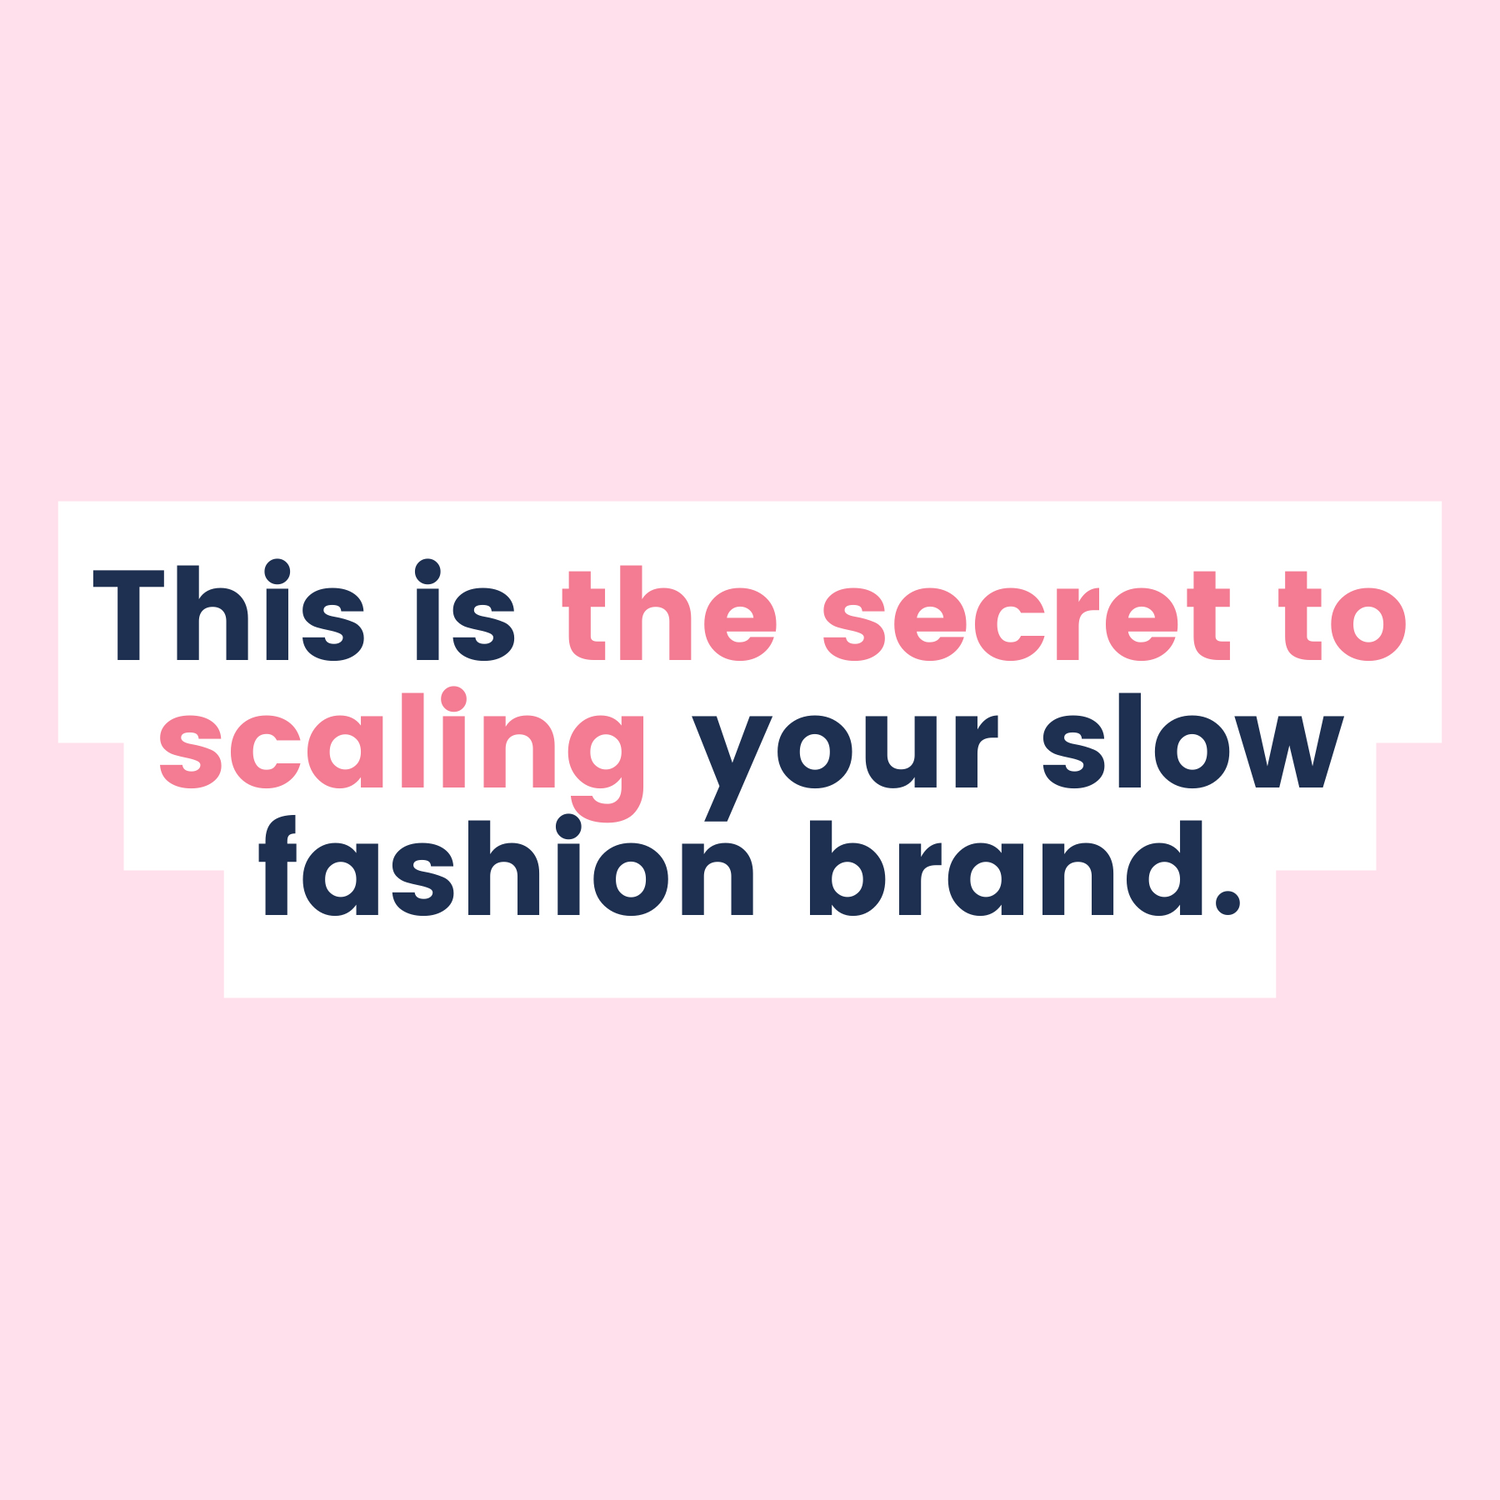 Want to learn how to scale your sustainable fashion label and get stocked all over the world - The Fashion Advocate